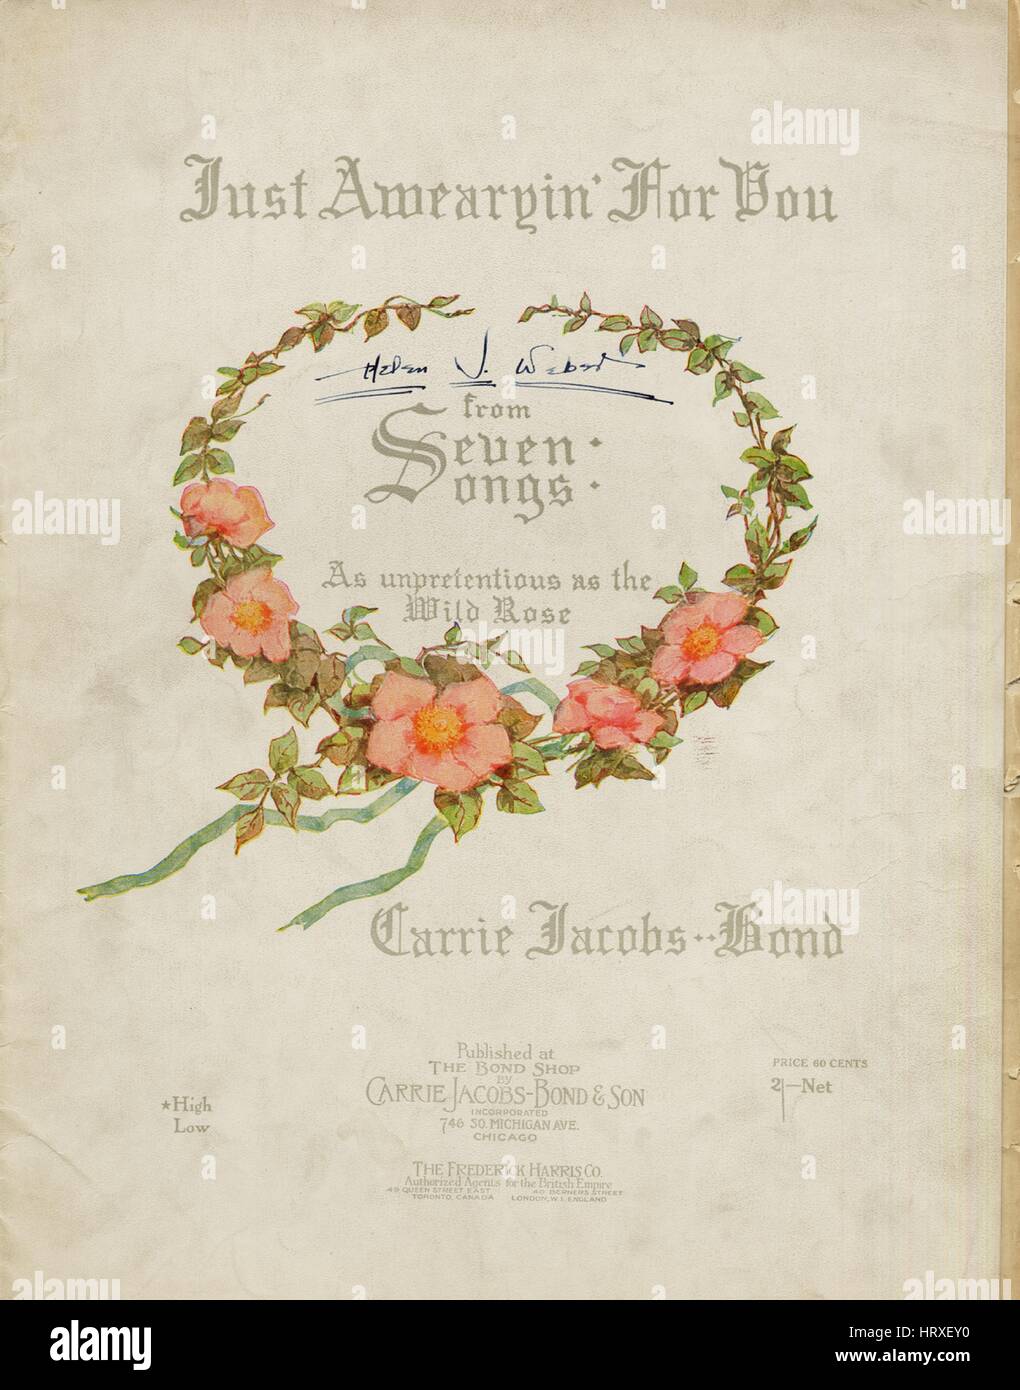 Sheet music cover image of the song 'Just A-wearyin' For You From Seven Songs As unpretentious as the Wild Rose', with original authorship notes reading 'Carrie Jacobs-Bond', United States, 1901. The publisher is listed as 'The Bond Shop by Carrie Jacobs-Bond, 746 So. Michigan Ave.', the form of composition is 'strophic (accompaniment varied on second verse)', the instrumentation is 'piano and voice', the first line reads 'Just a-wearyin' for you, all the time feelin' blue', and the illustration artist is listed as 'None'. Stock Photo